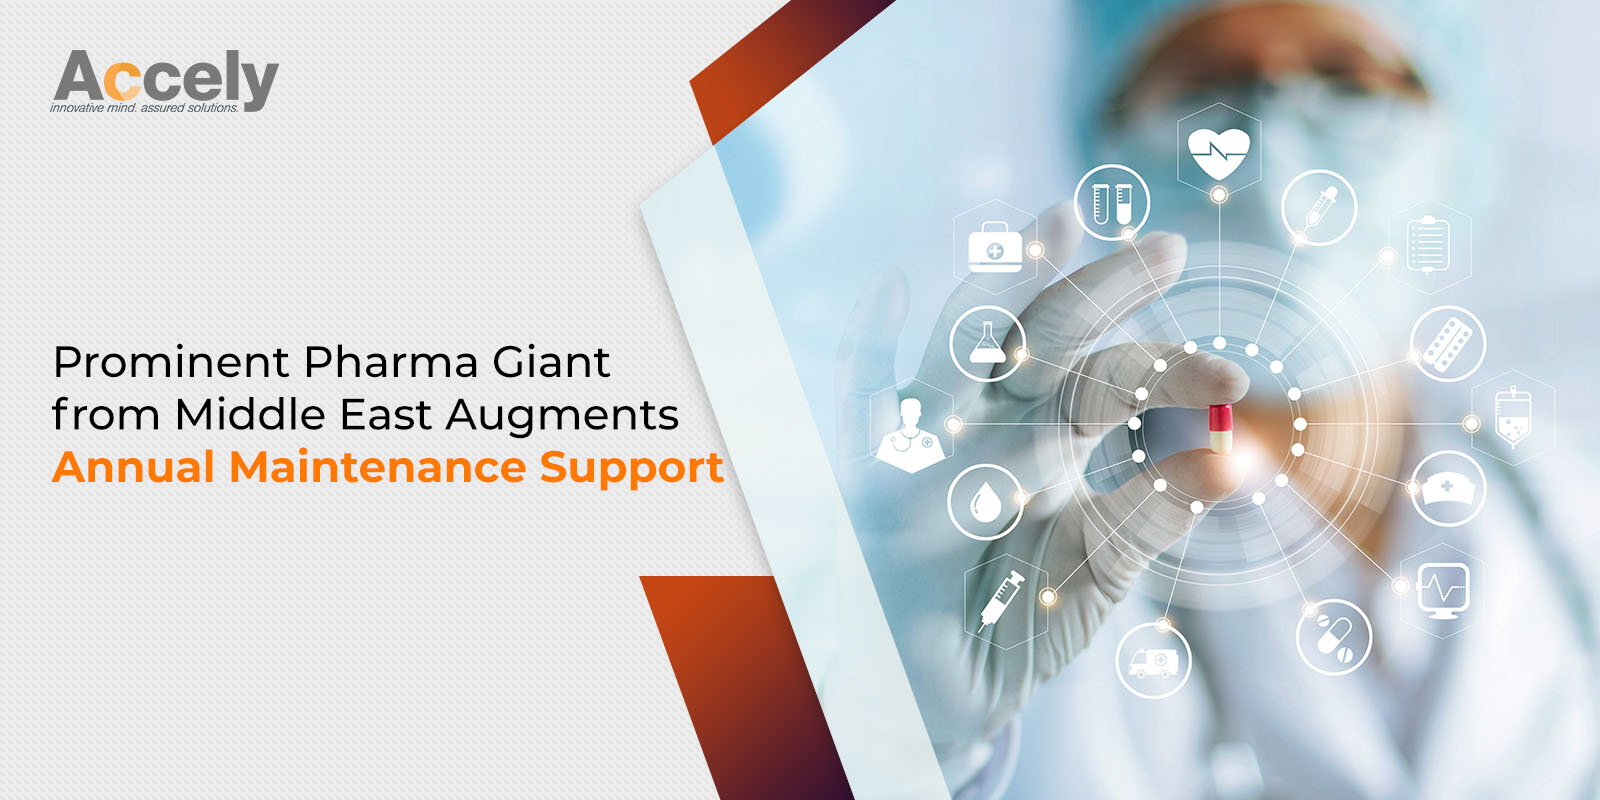 Prominent Pharma Giant from Middle East Augments Annual Maintenance Support